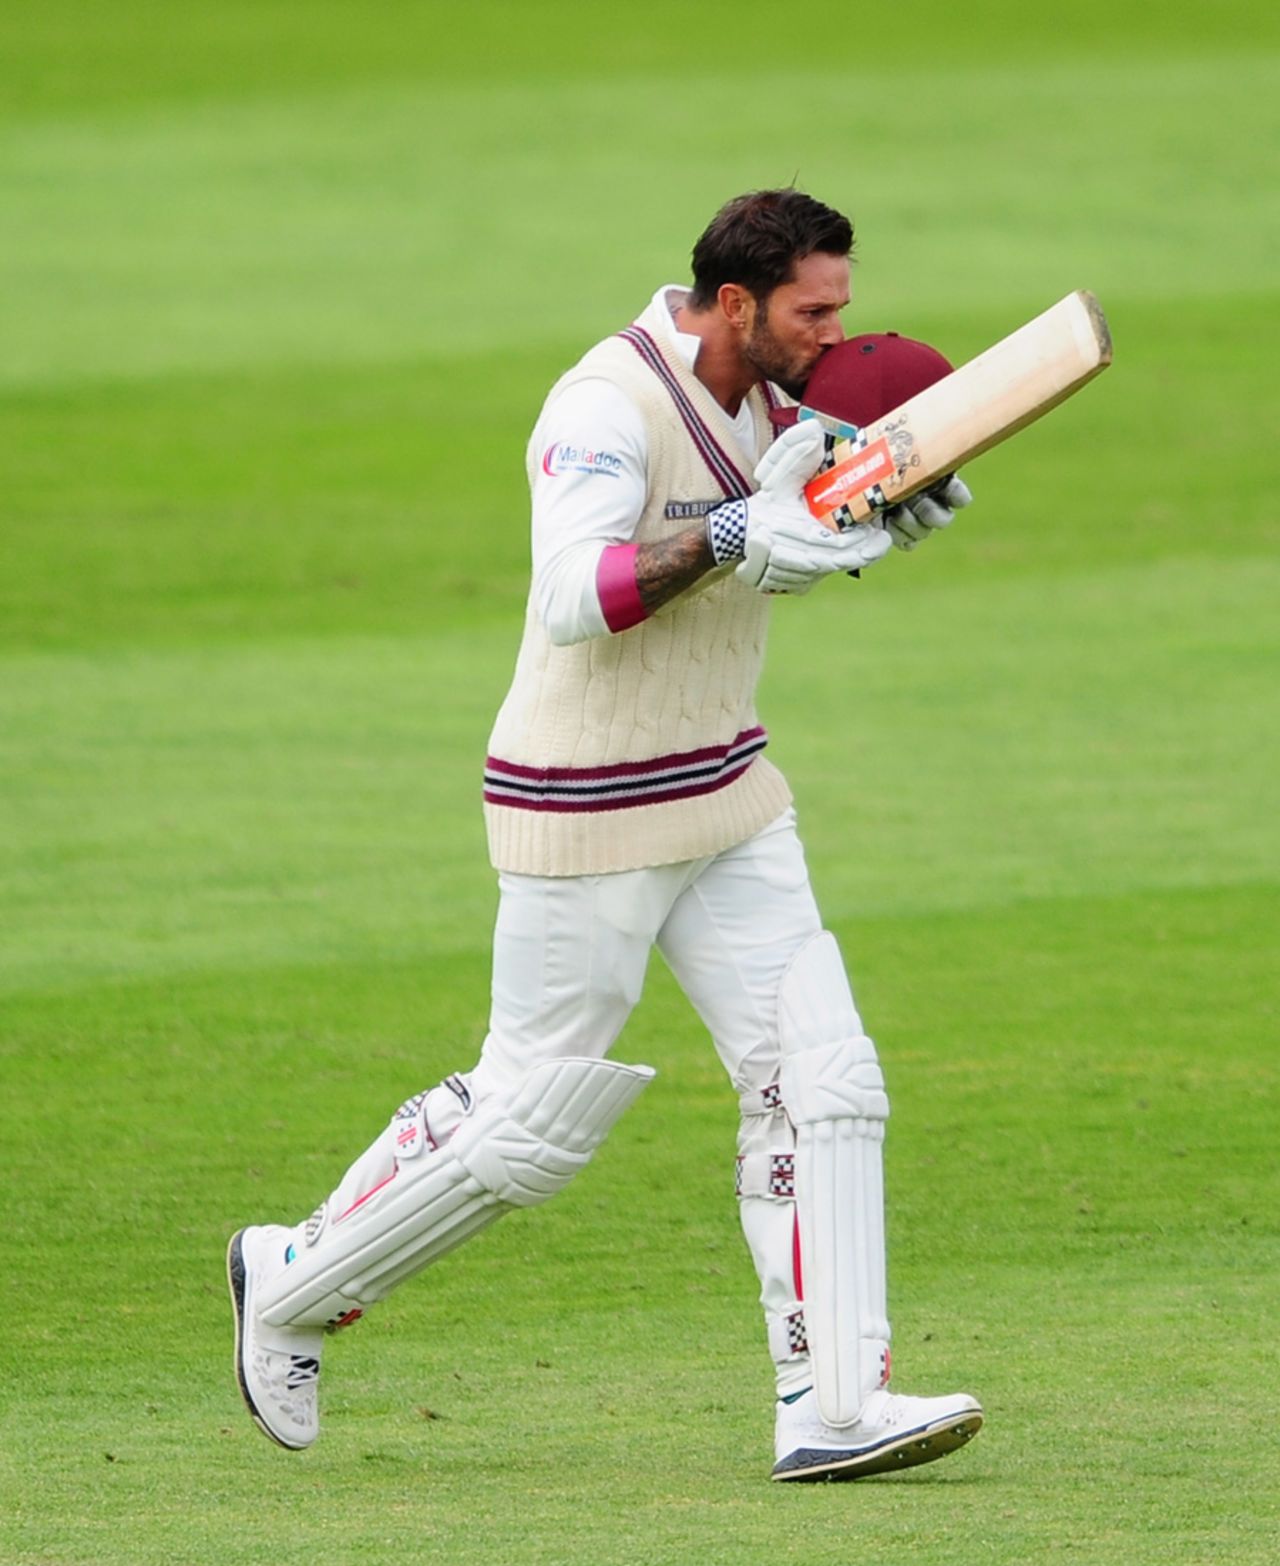 Peter Trego celebrates a fine century for Somerset, Somerset v Middlesex, Specsavers Championship Division One, Taunton, 3rd day, July 12, 2016